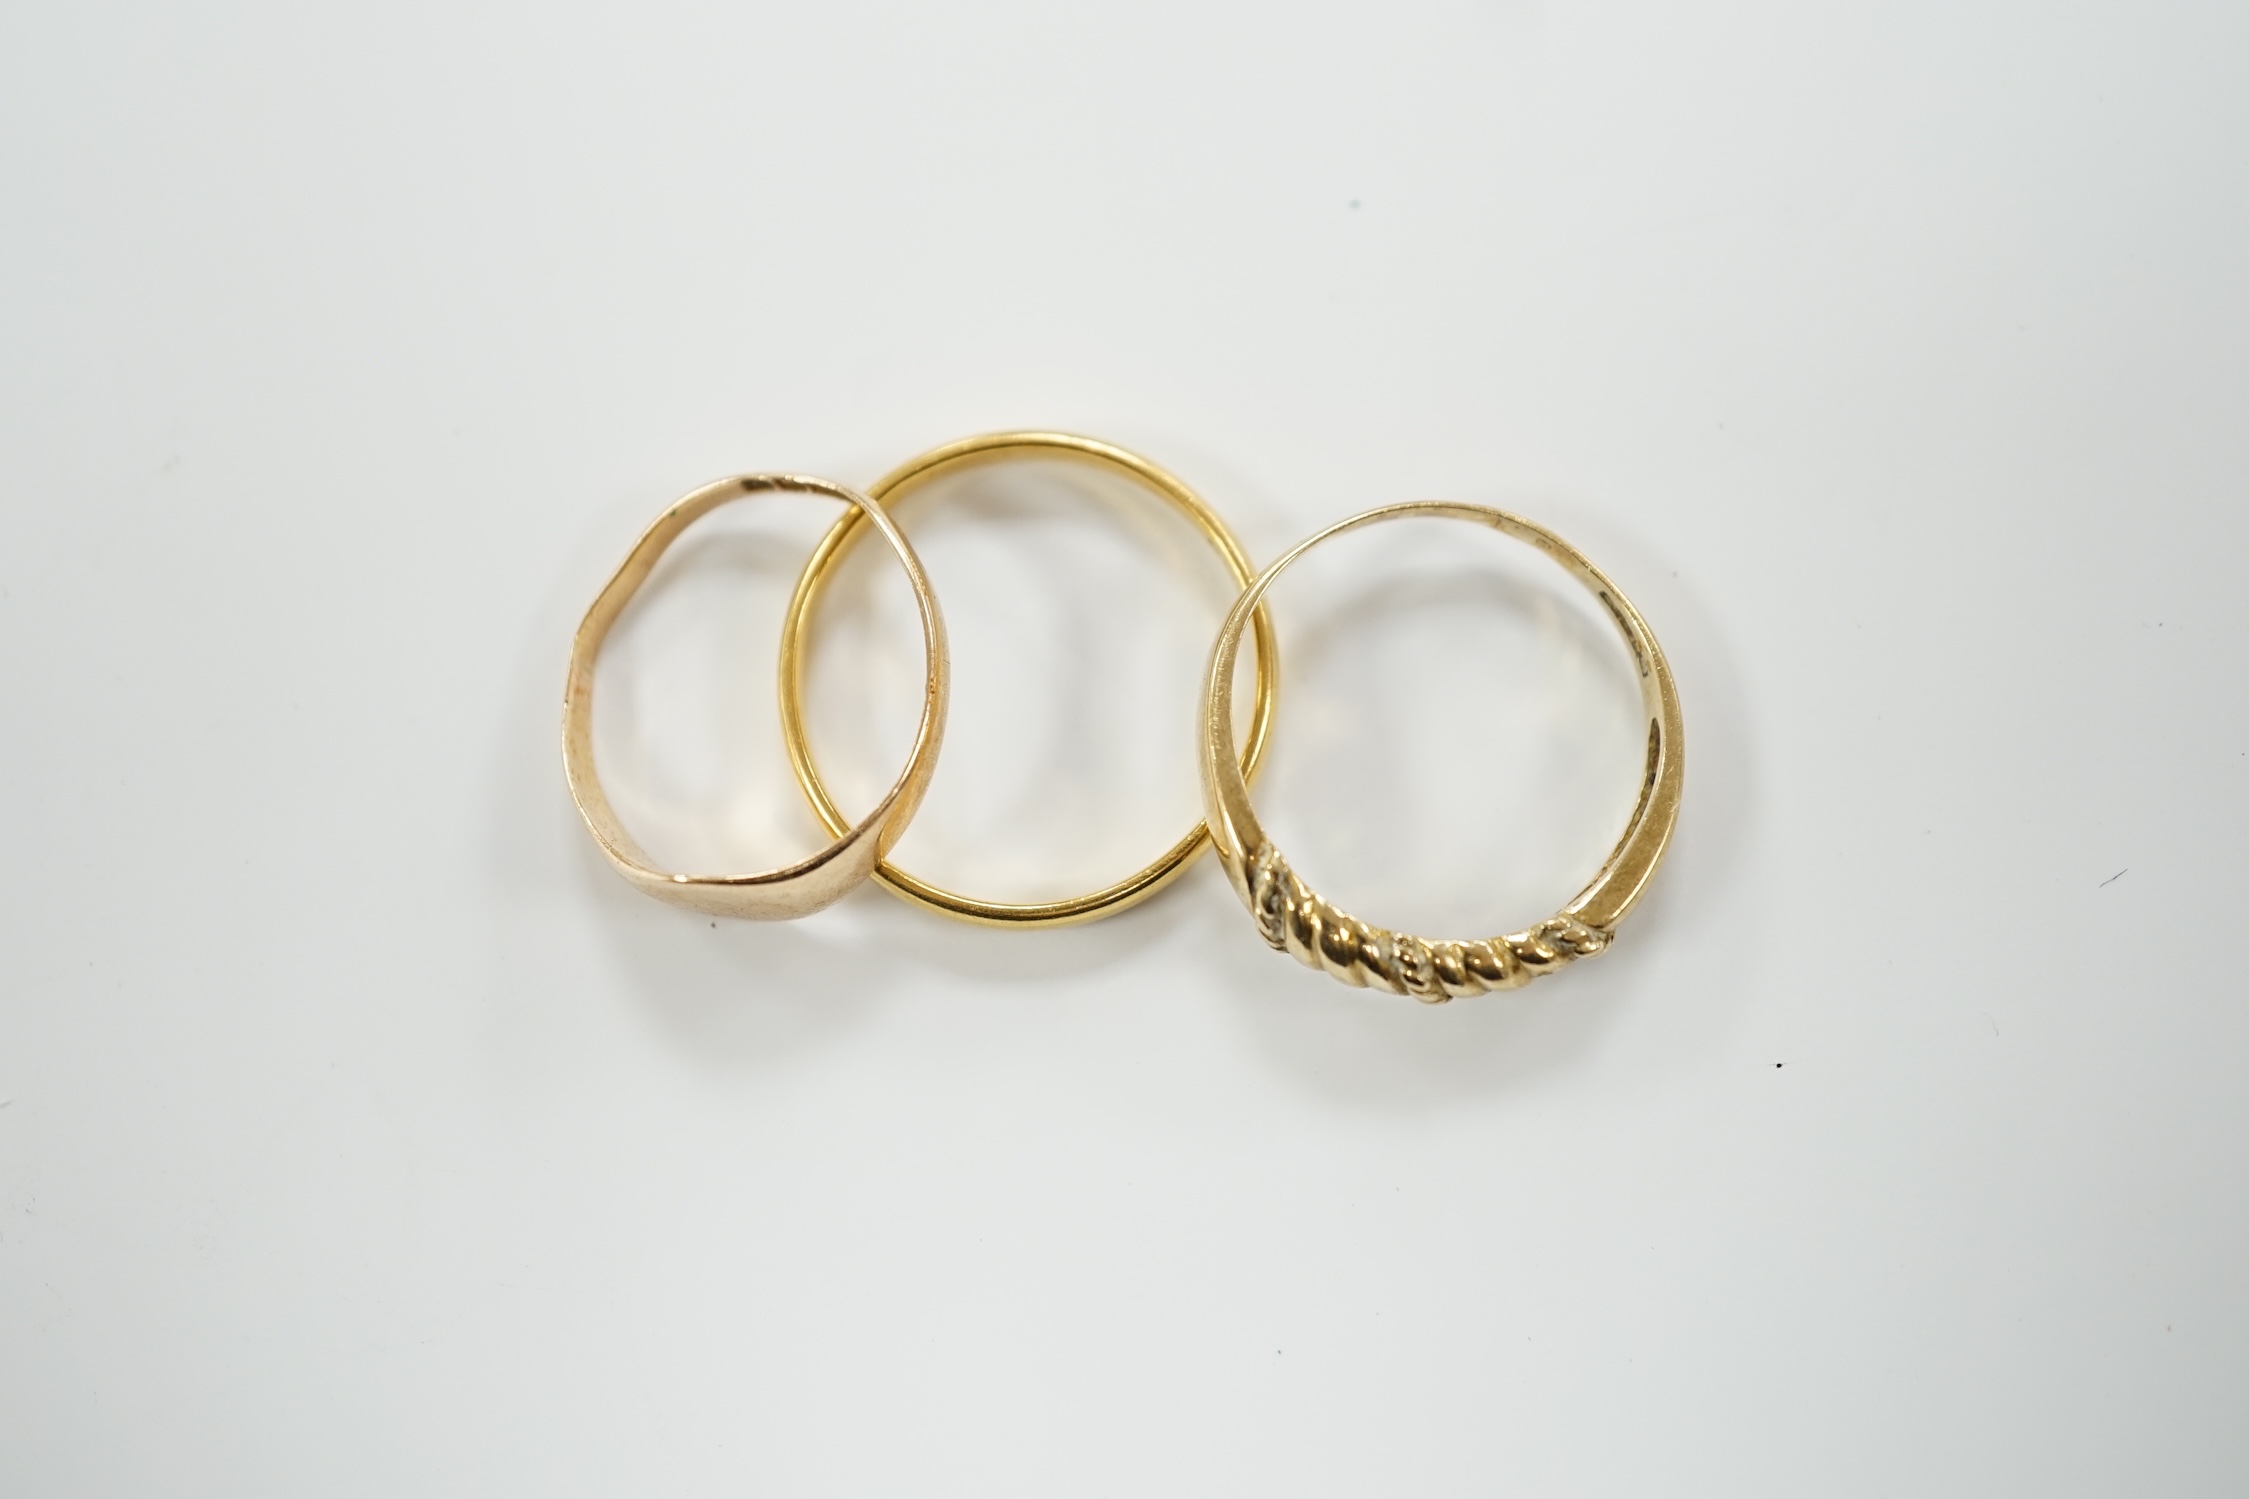 A 22ct gold wedding band, 3.4 grams, a 9ct gold signet ring, 16 grams and a yellow metal ring. - Image 2 of 4